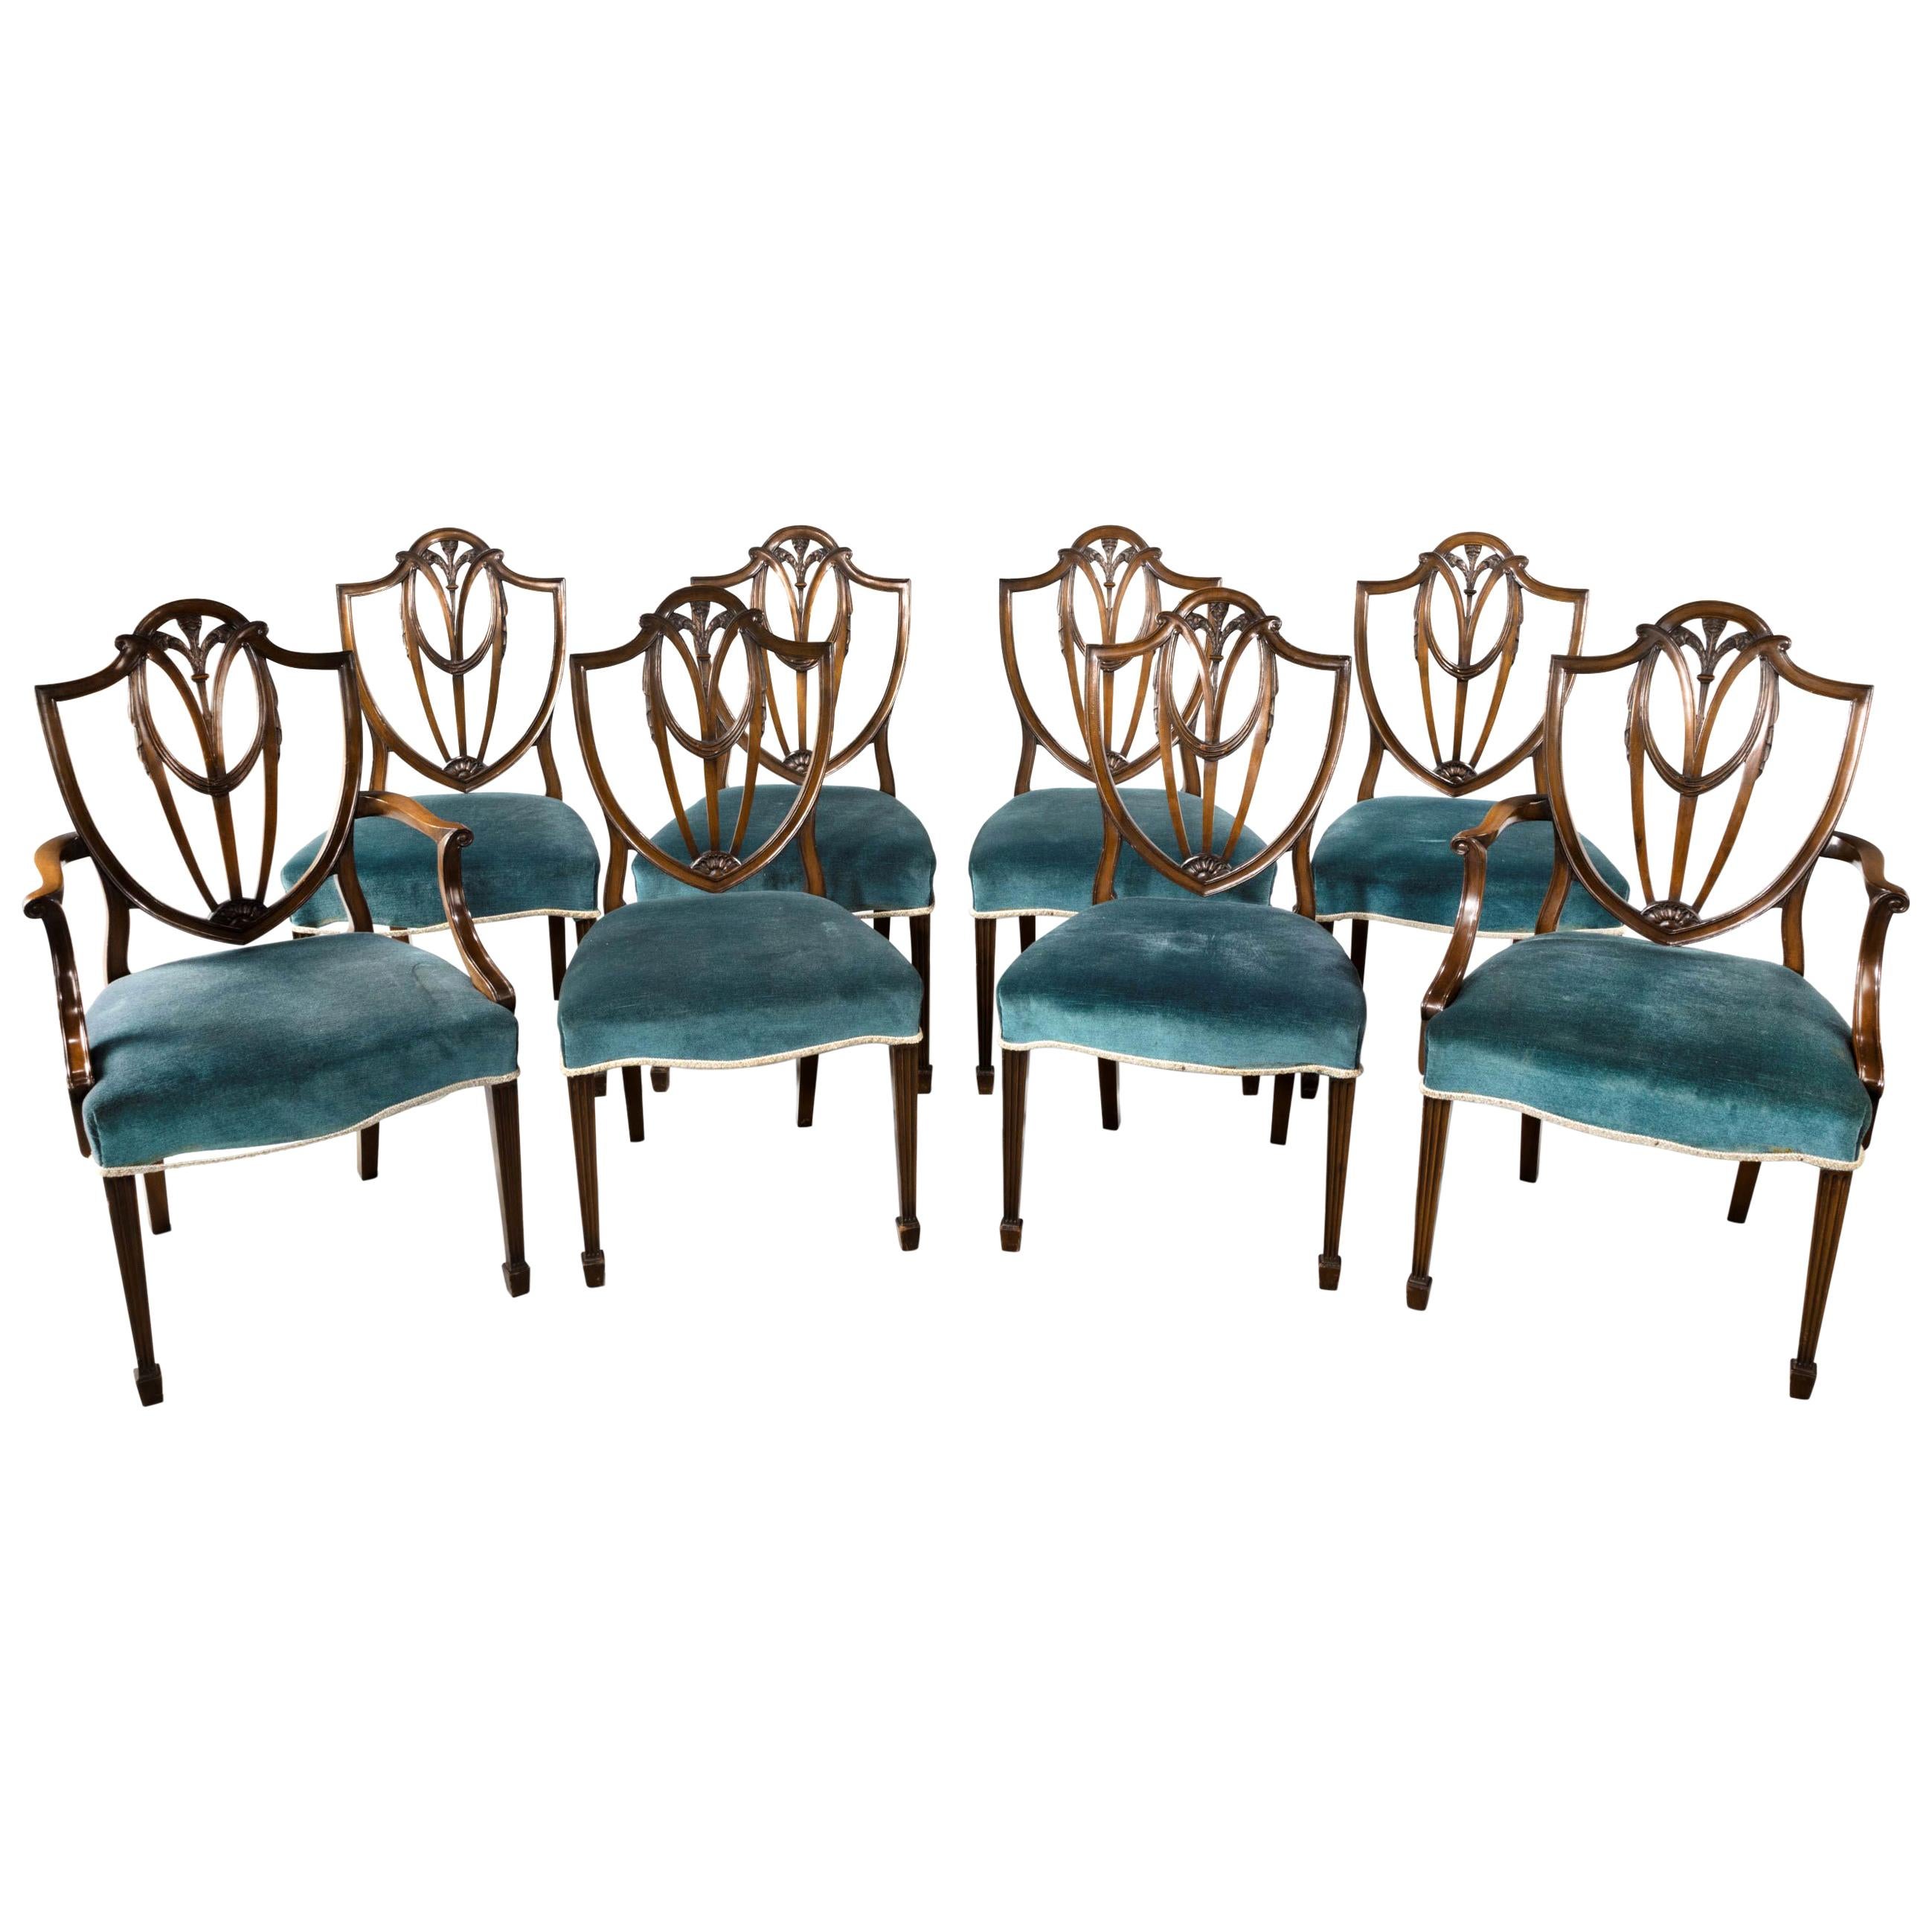 Most Attractive Set of 8 '6+2' Early 20th Century Hepplewhite Chairs